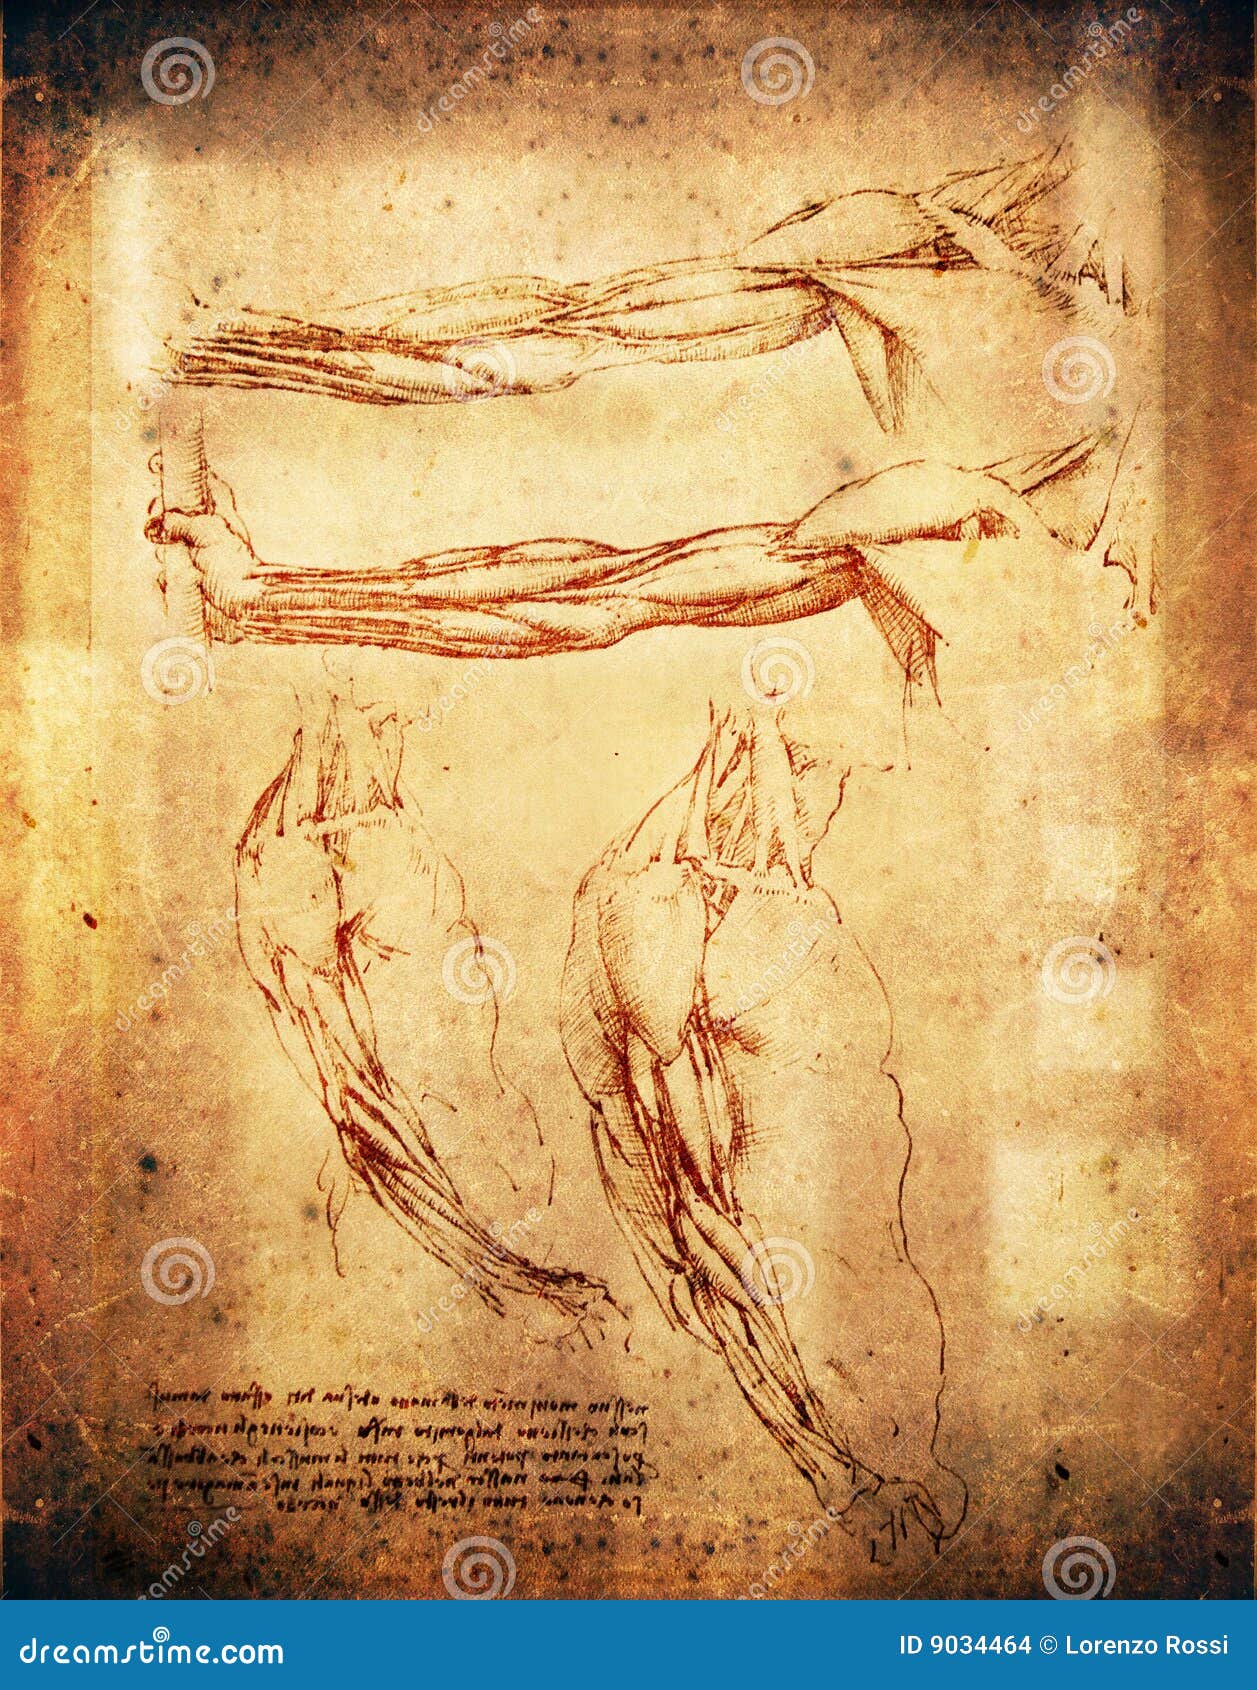 Learn About The Wonders Of The Human Body From The Man Himself In Leonardo  Da Vinci: